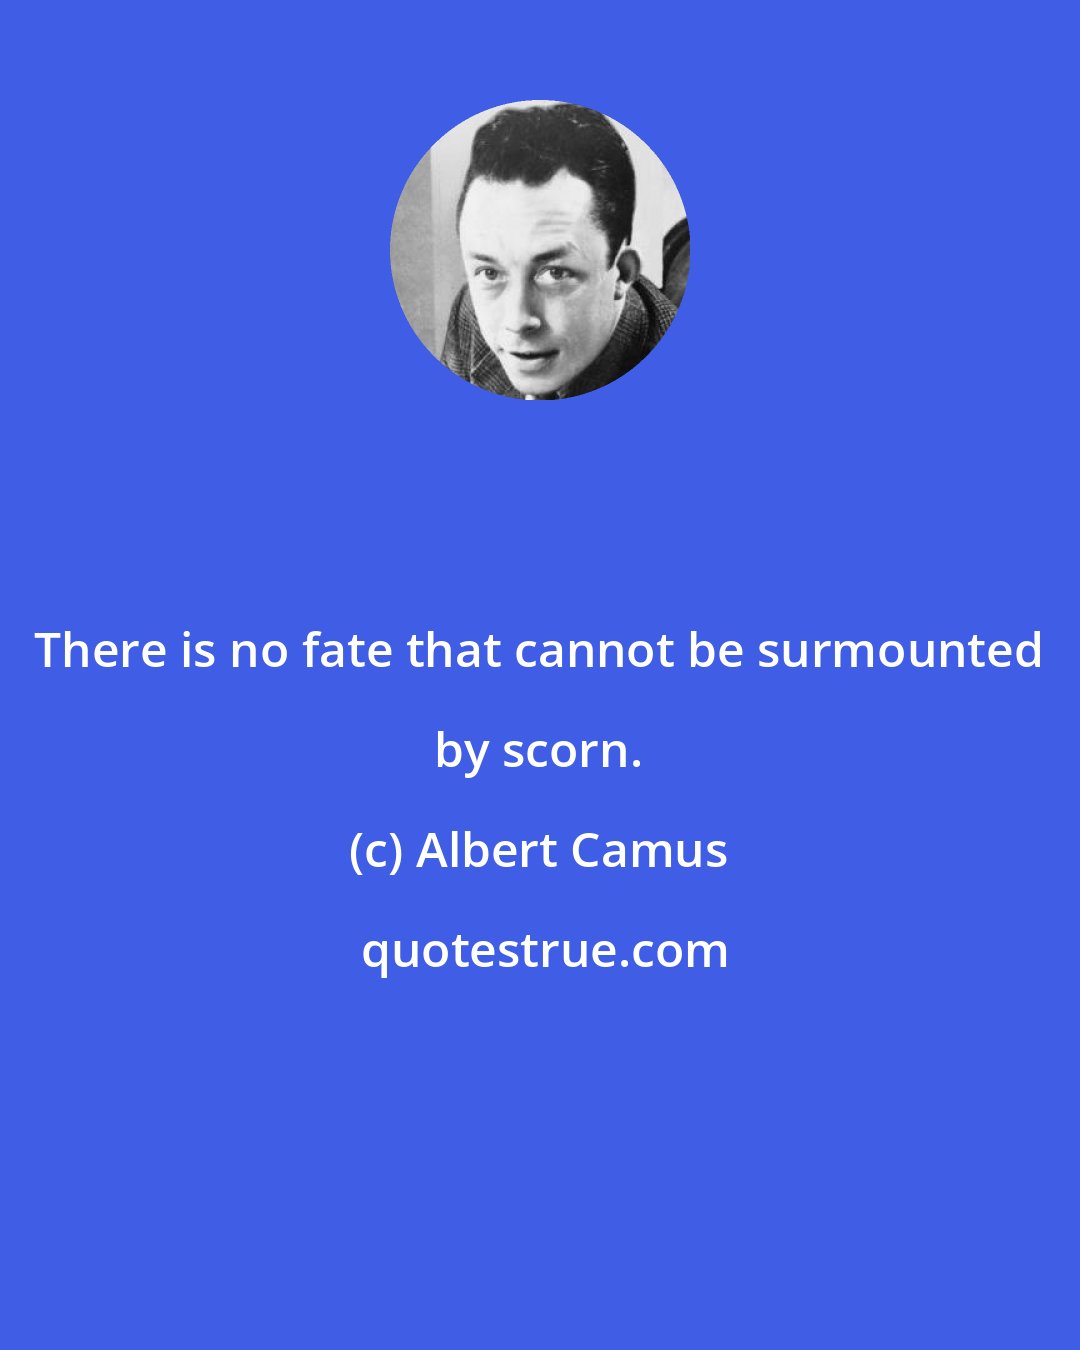 Albert Camus: There is no fate that cannot be surmounted by scorn.